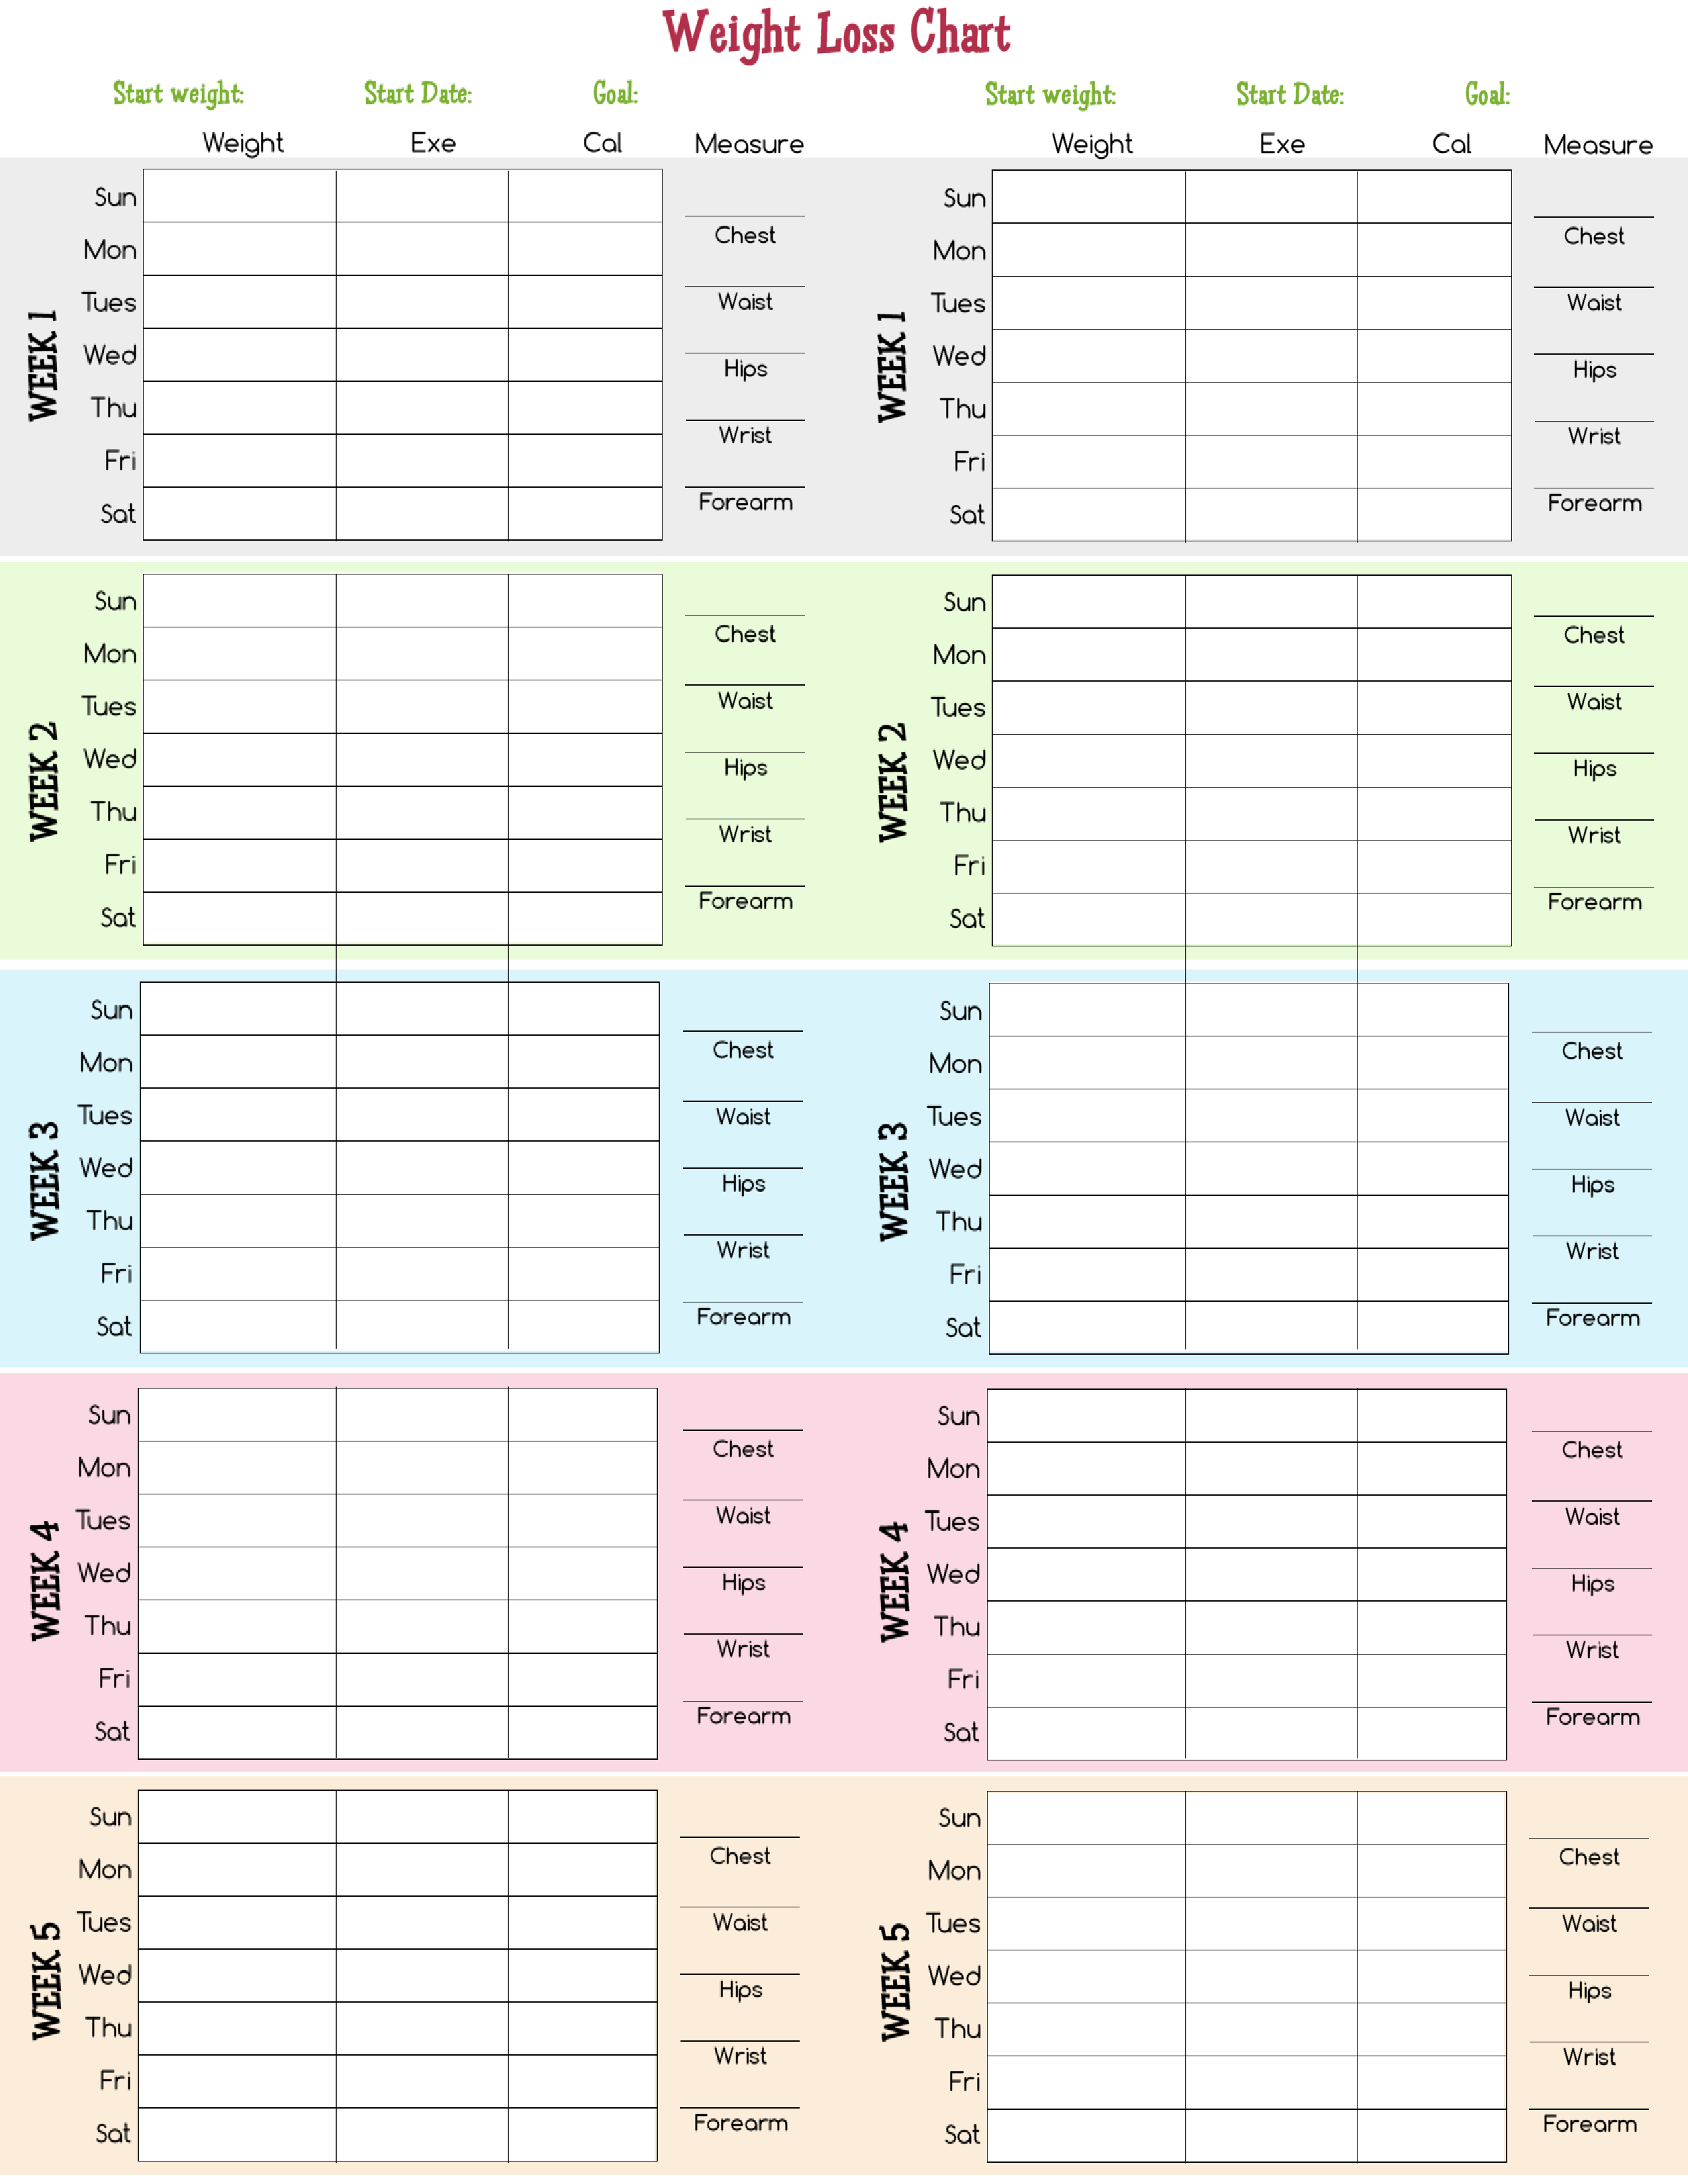 weekly-weight-loss-chart-templates-at-allbusinesstemplates